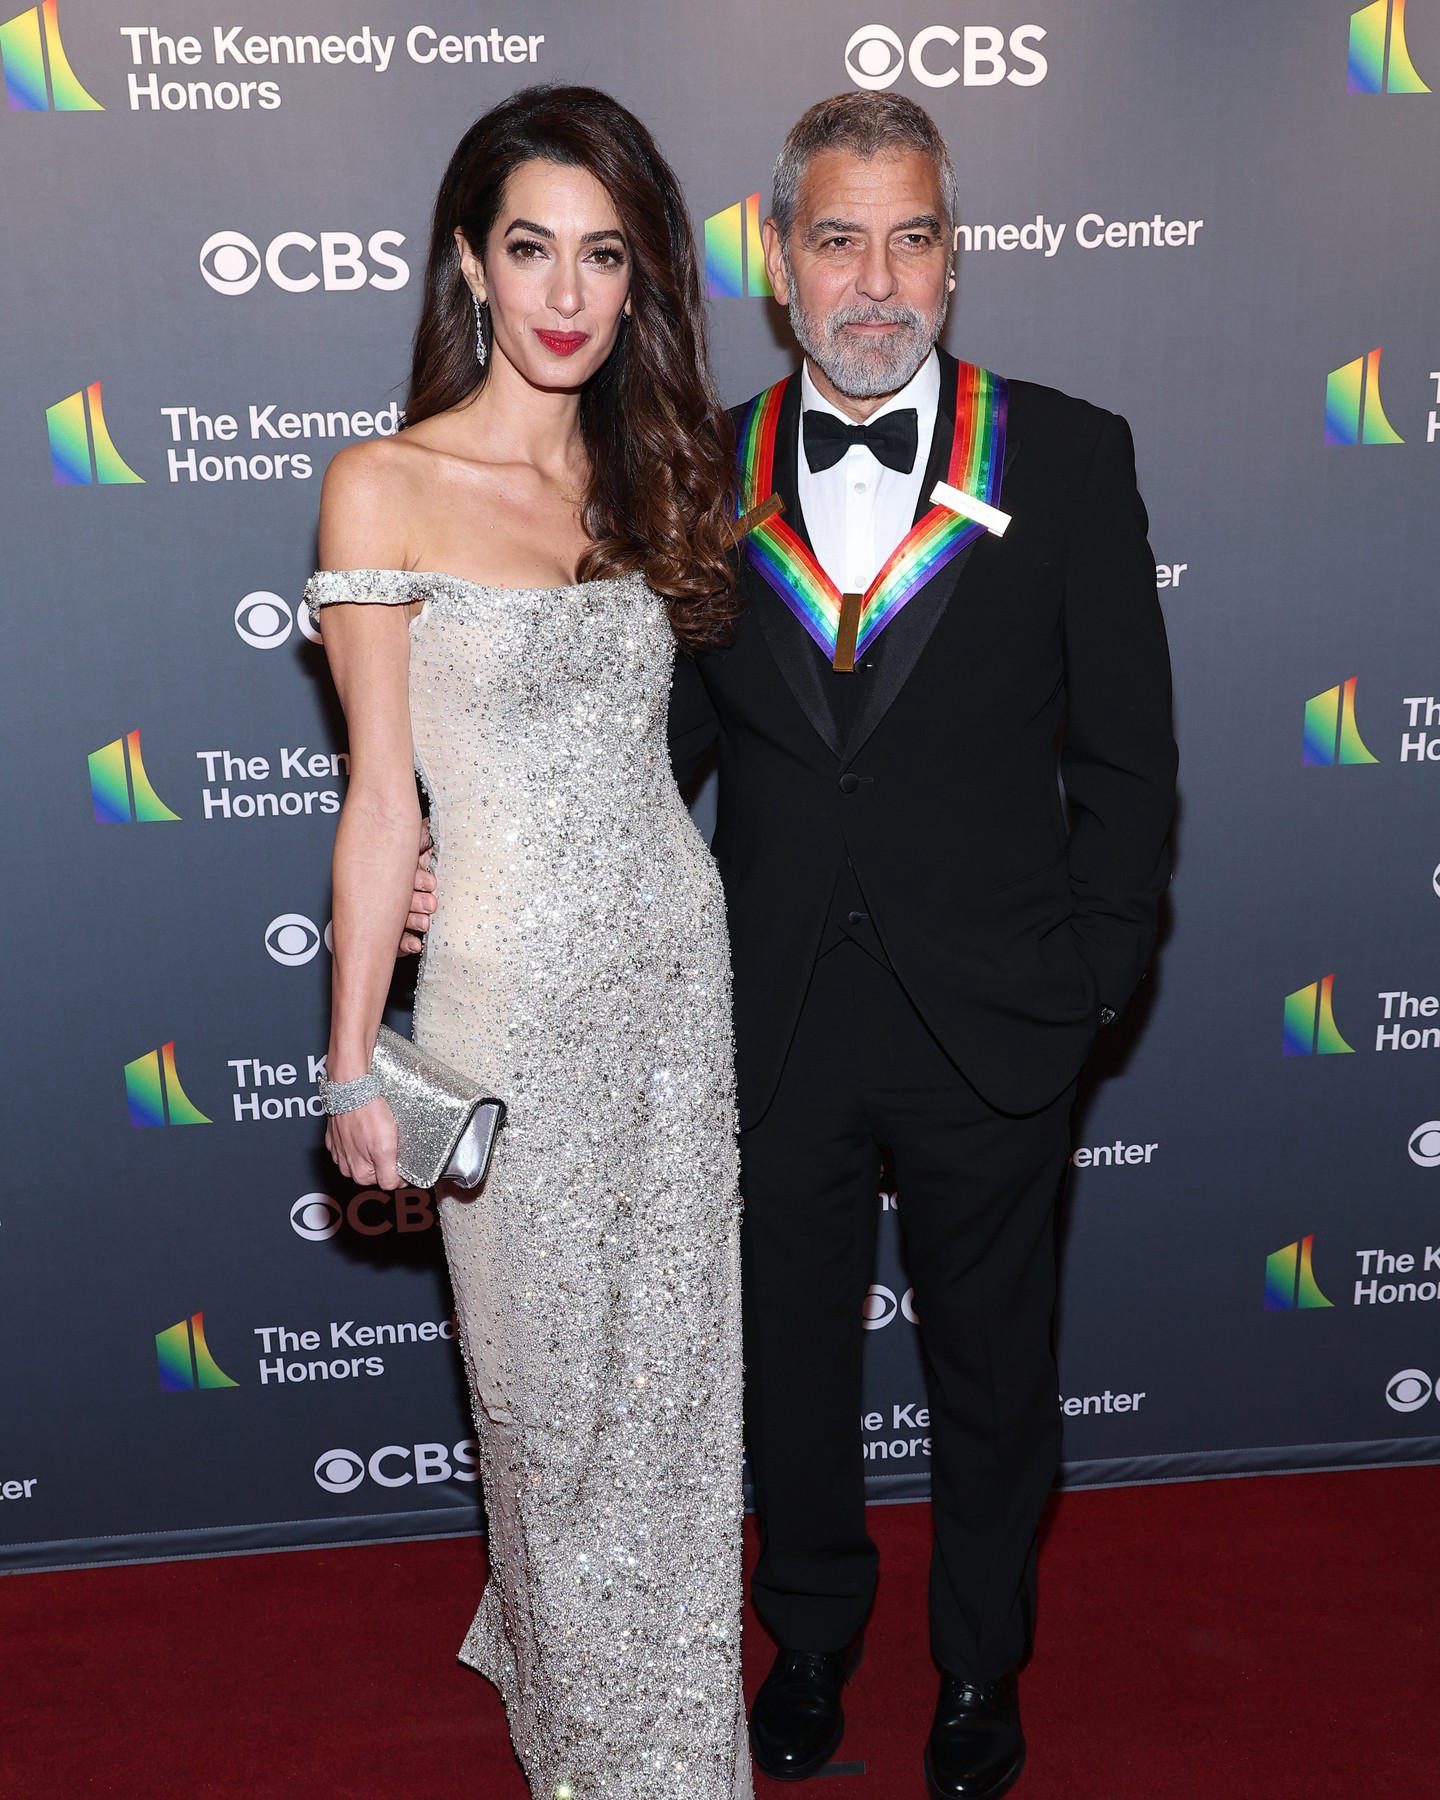 Vogue - At tonight’s 45th annual Kennedy Center Honors, actor George Clooney is being honored for hi